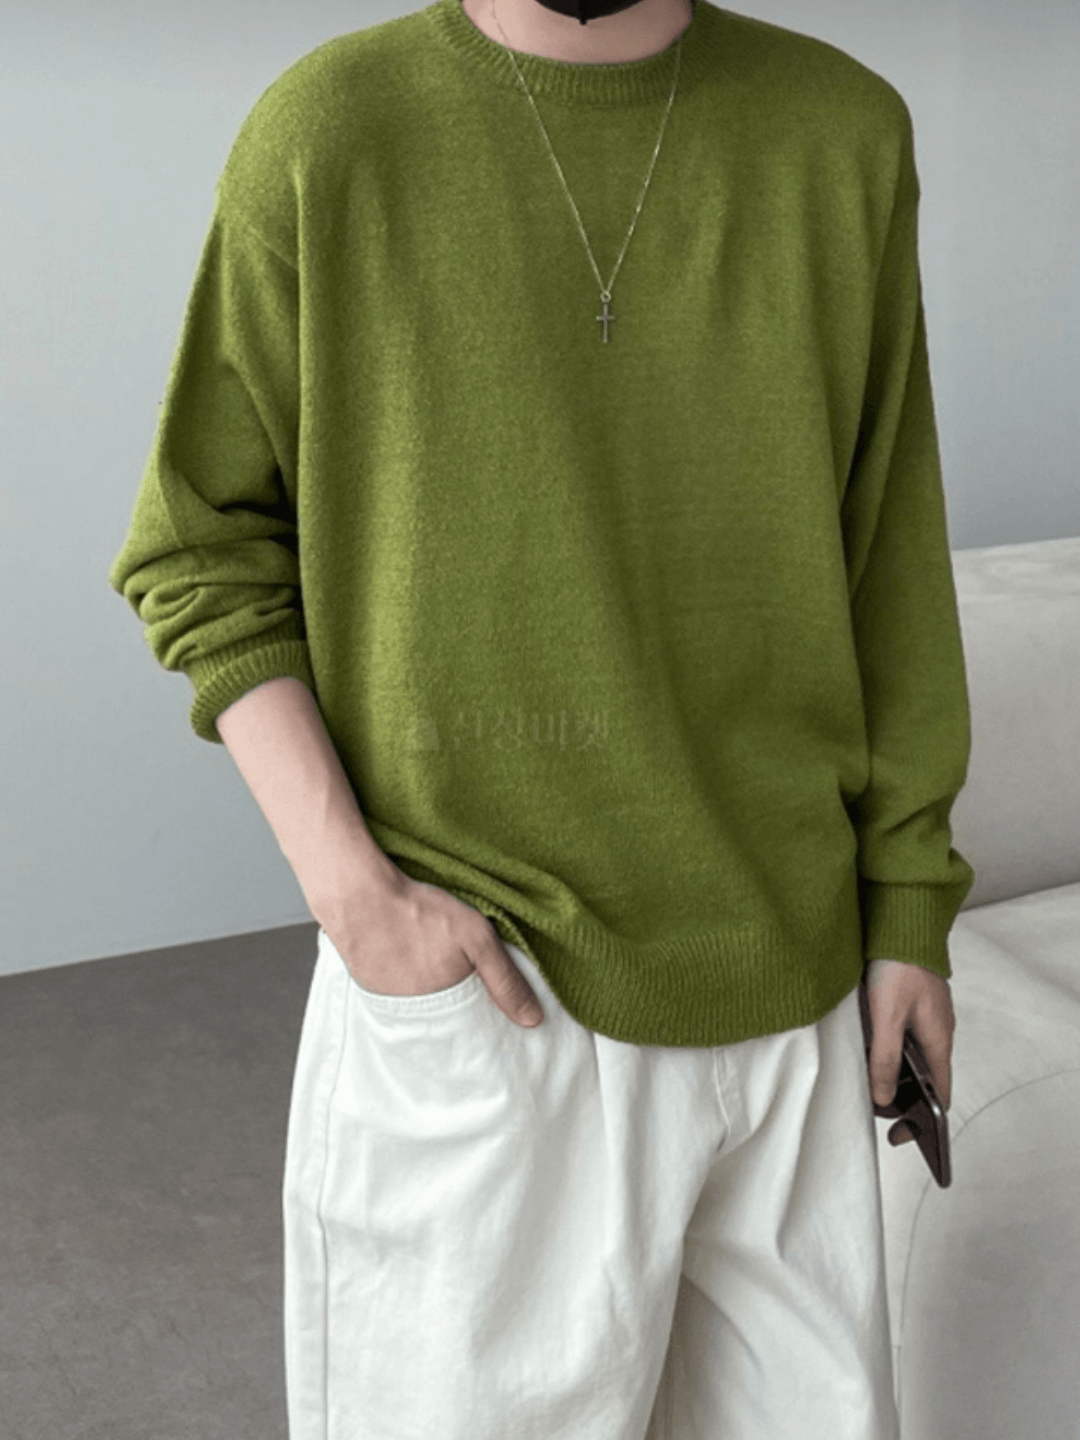 [FLAT ROOM] Solid Bookle Knit